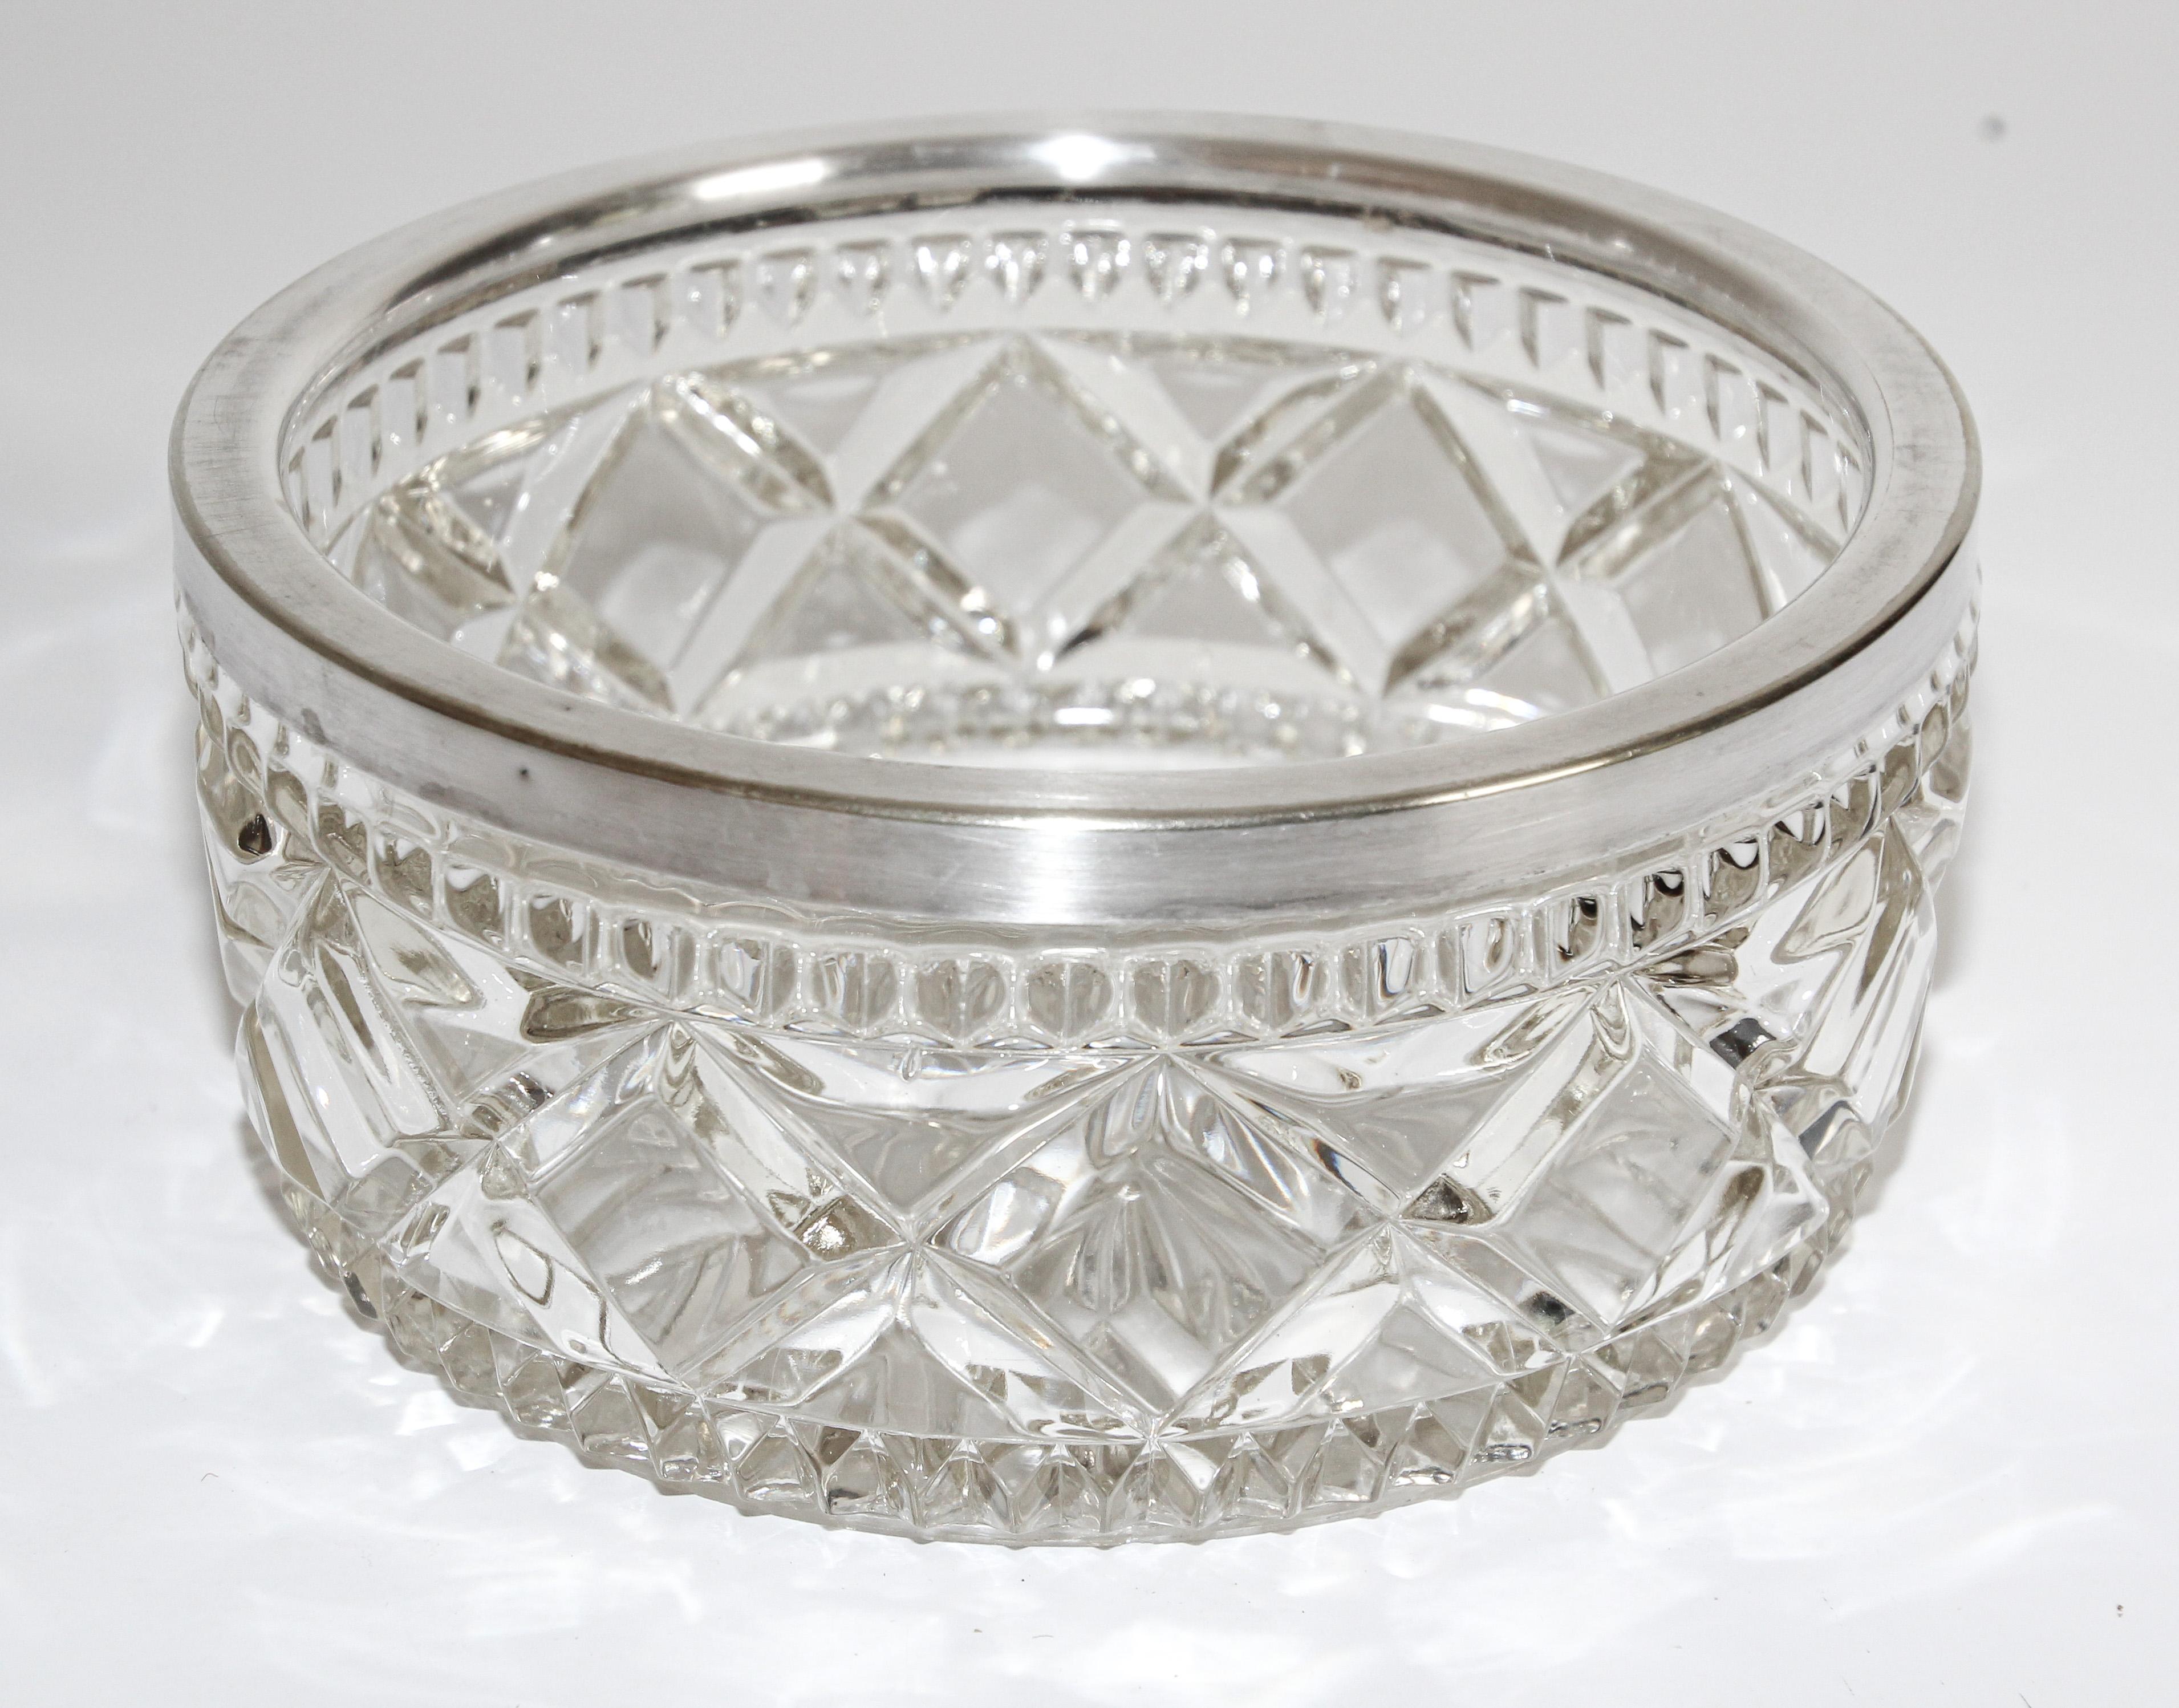 Modern Vintage Large Crystal Bowl with Silver Plated Rim